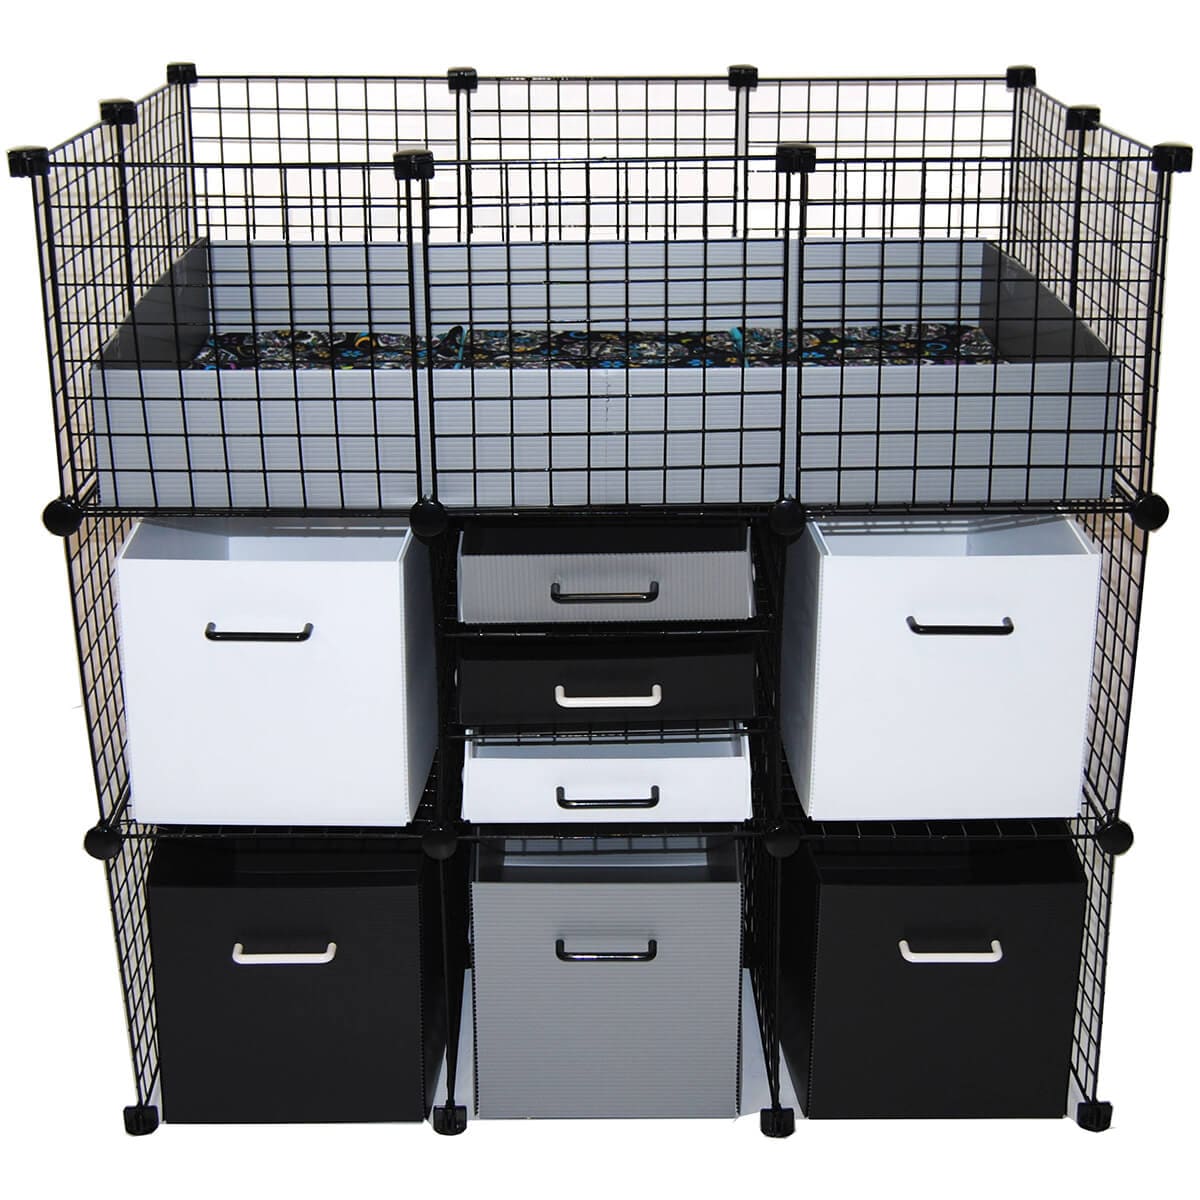 Three mini bin drawers paired with five standard bins below a small C&C guinea pig cage